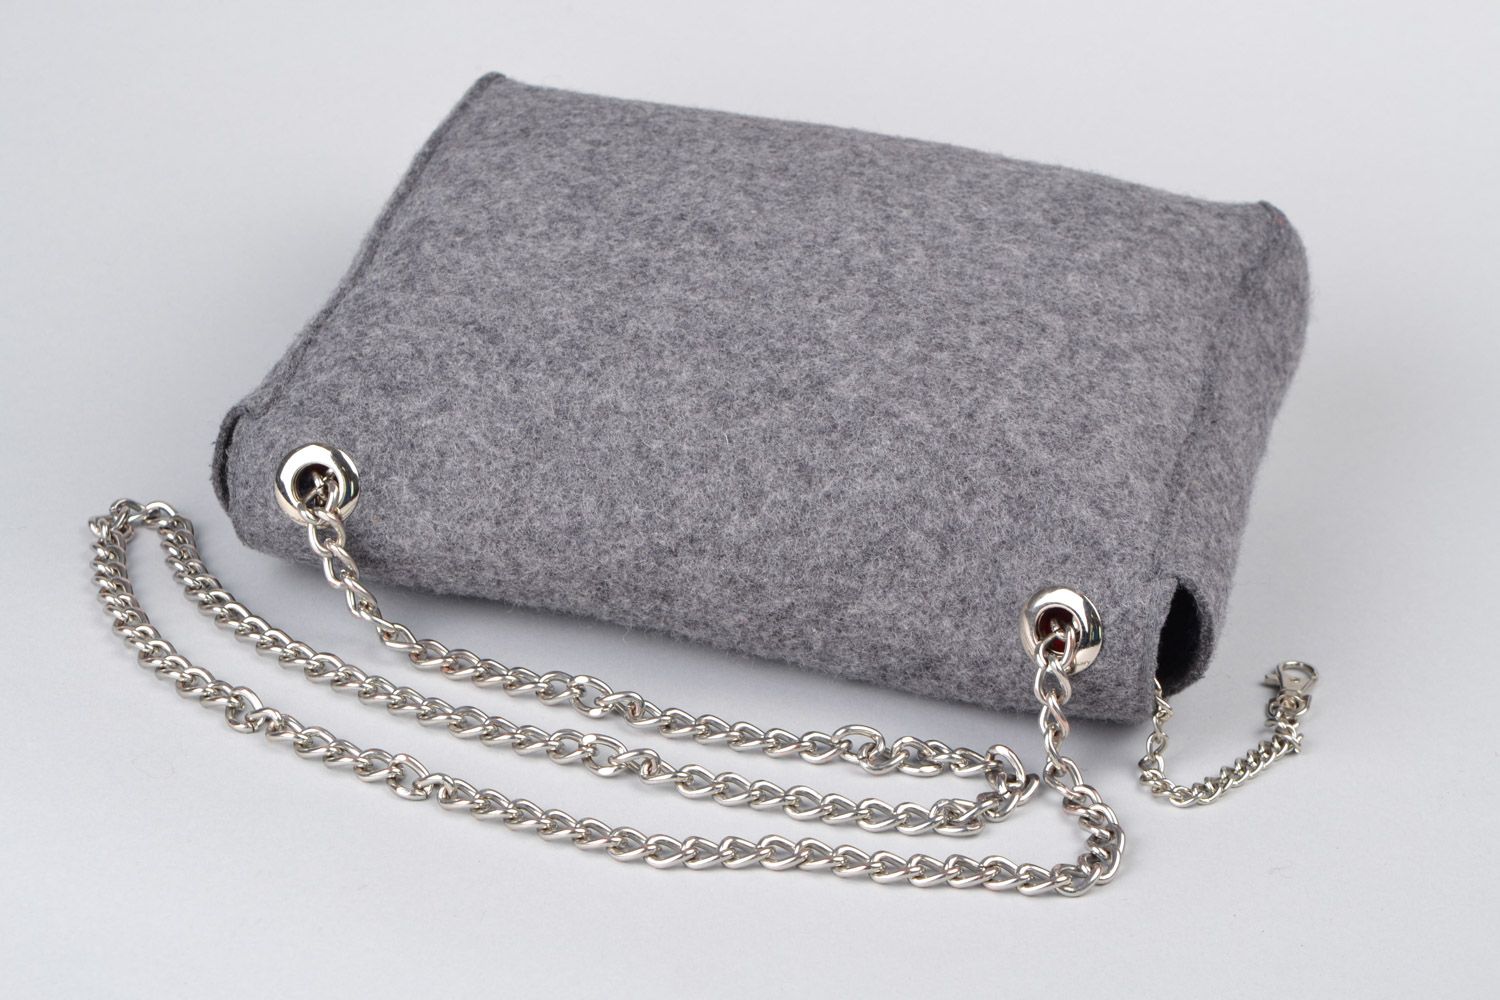 Handmade laconic handbag of gray color felted of wool with metal chain handle photo 3